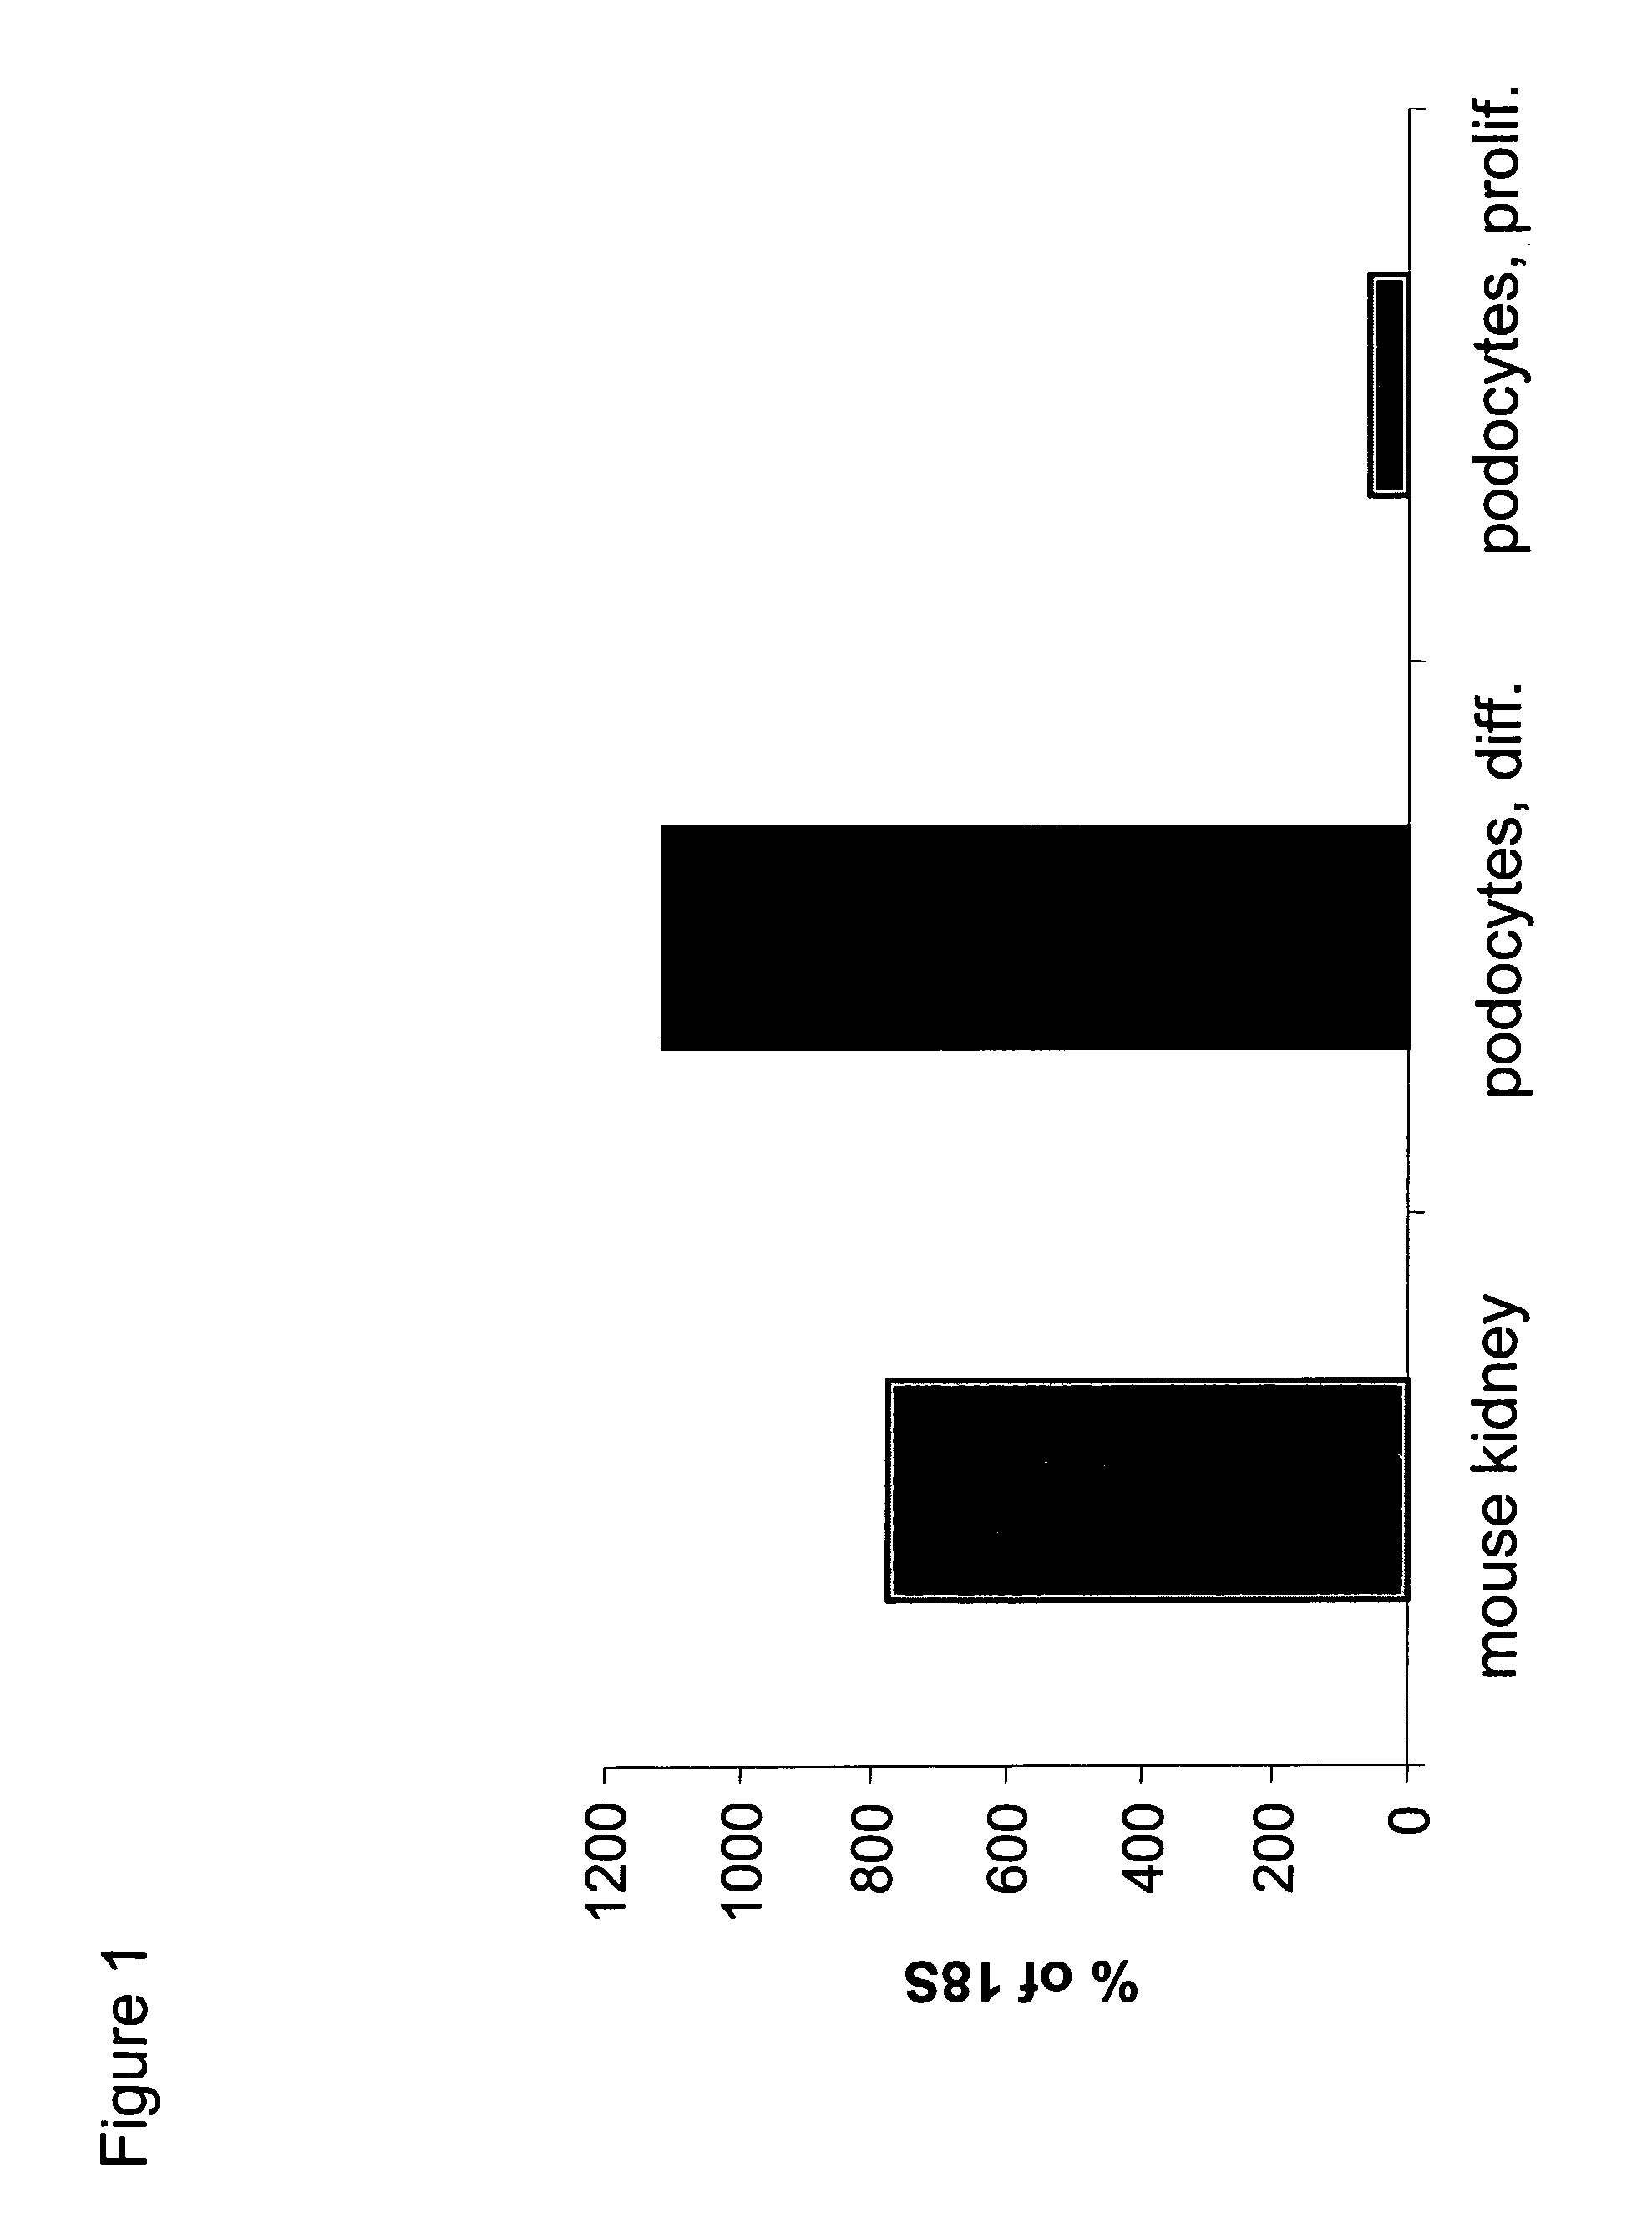 Methods for treating podocyte-related disorders